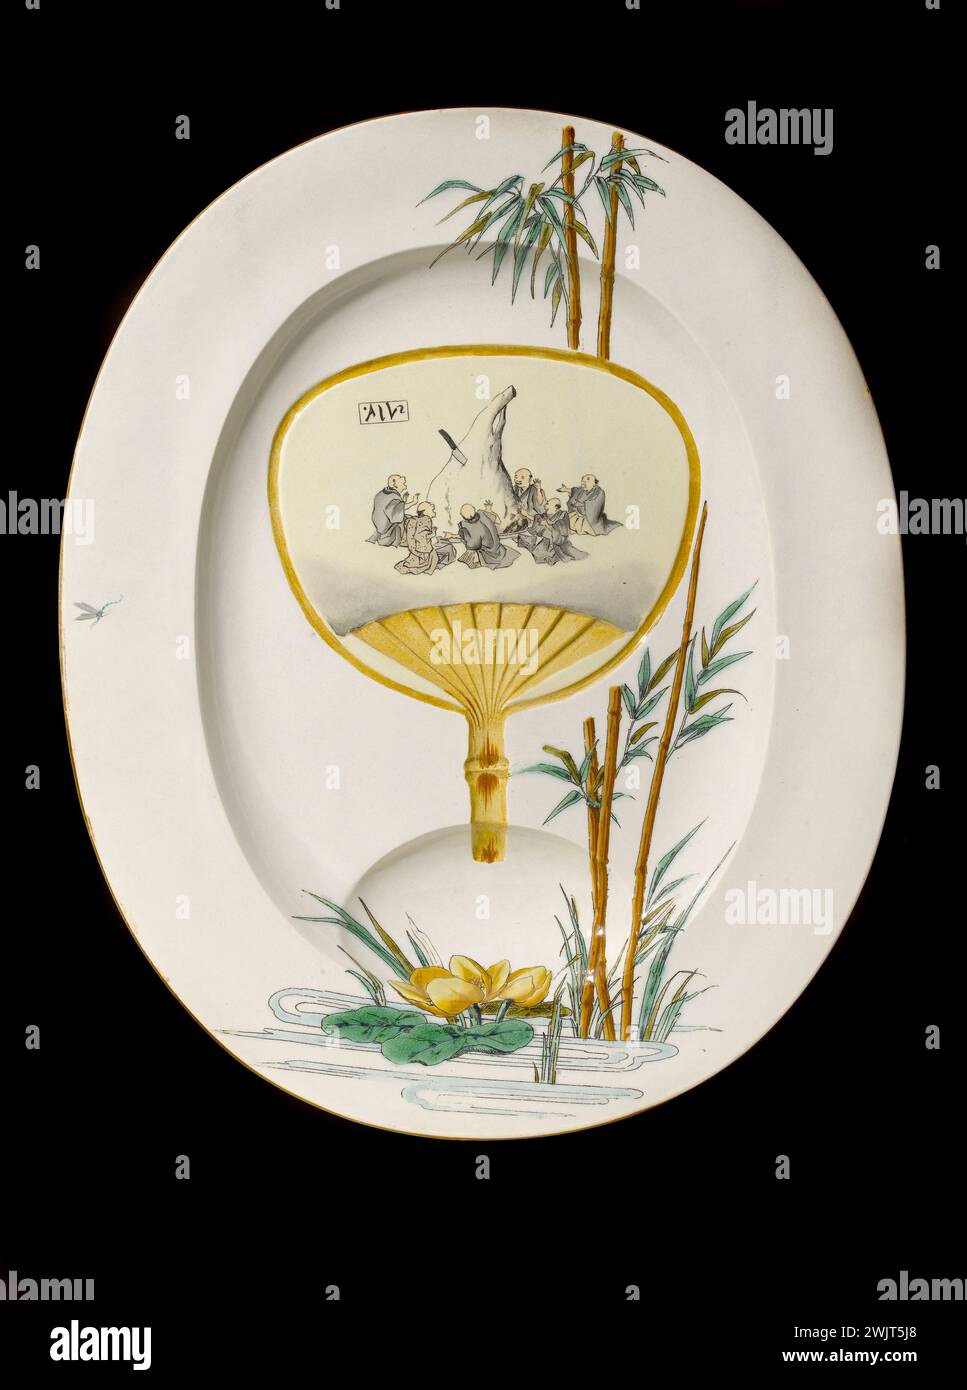 Flat. Earthenware. JULES Old and Cie Manufacture. 2nd half of the 19th century. Museum of Fine Arts of the City of Paris, Petit Palais. PLAT Bamboo, bamboo, crockery, dish, earthenware, faience, jules old man and cie manufacturers, jules old man's and cie, dishes, dish Stock Photo